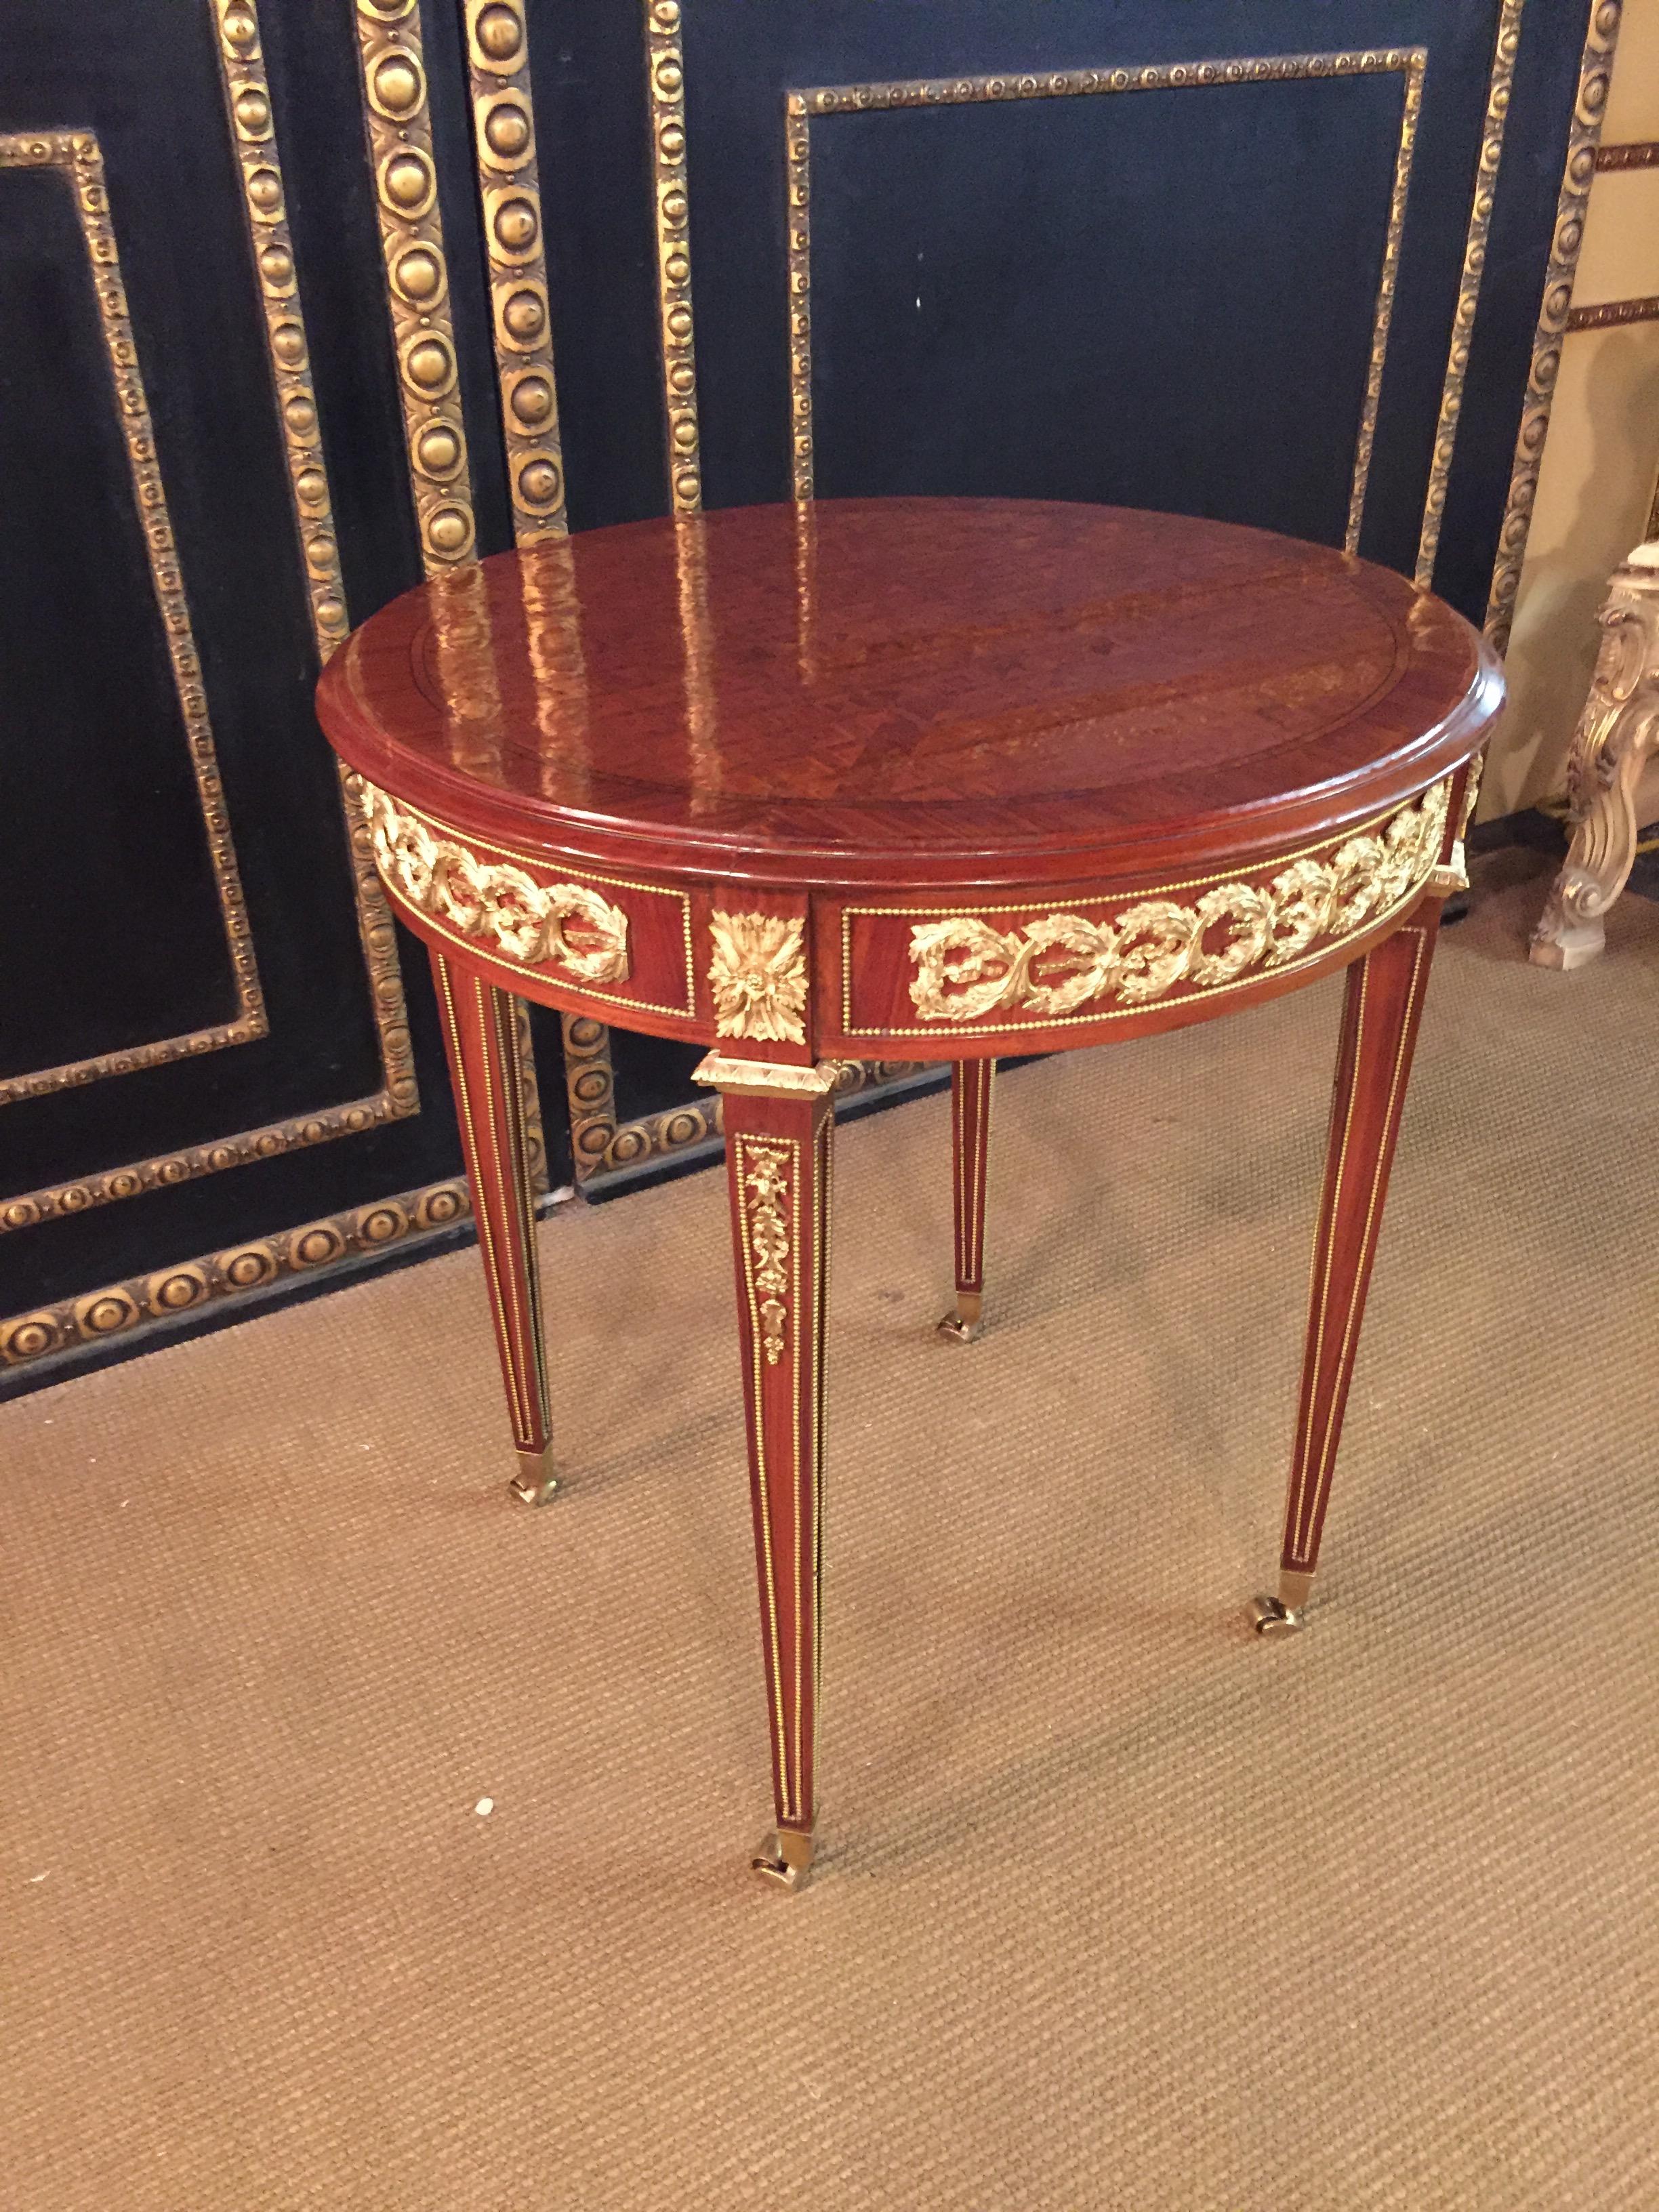 Mahogany 20th Century Louis XVI Style with Round Platte with Inlays French Table